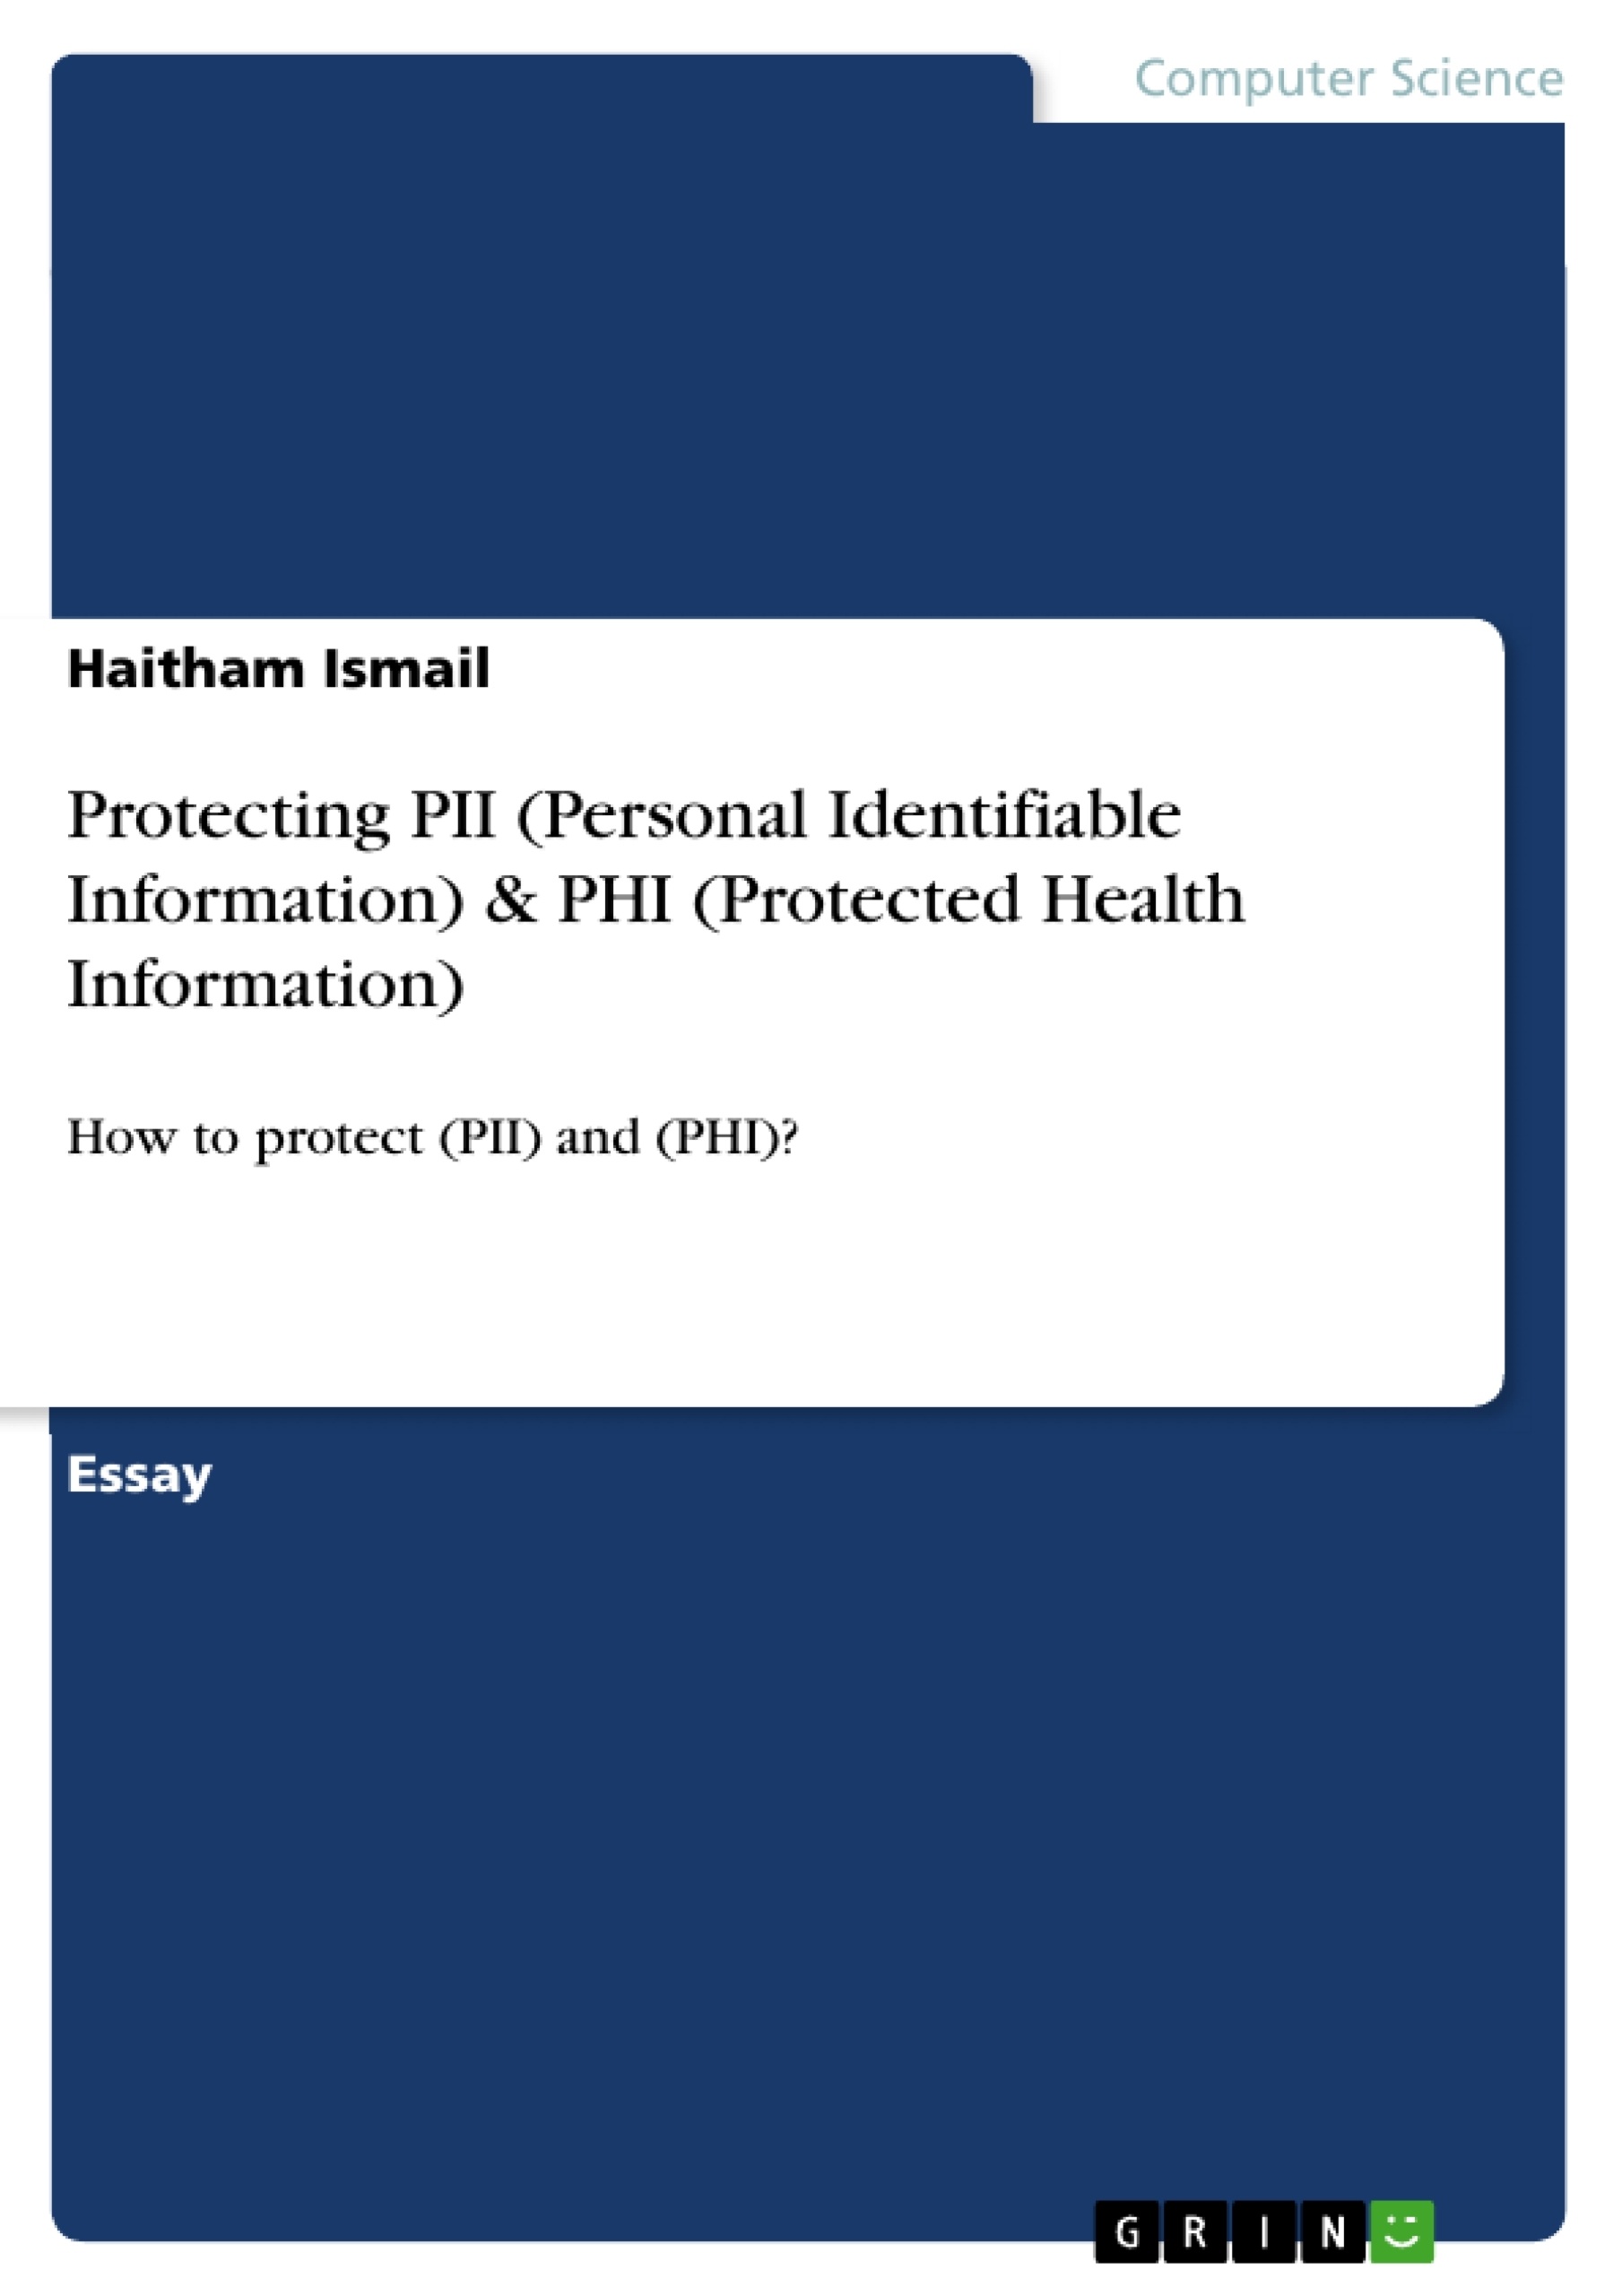 Titre: Protecting PII (Personal Identifiable Information) & PHI (Protected Health Information)